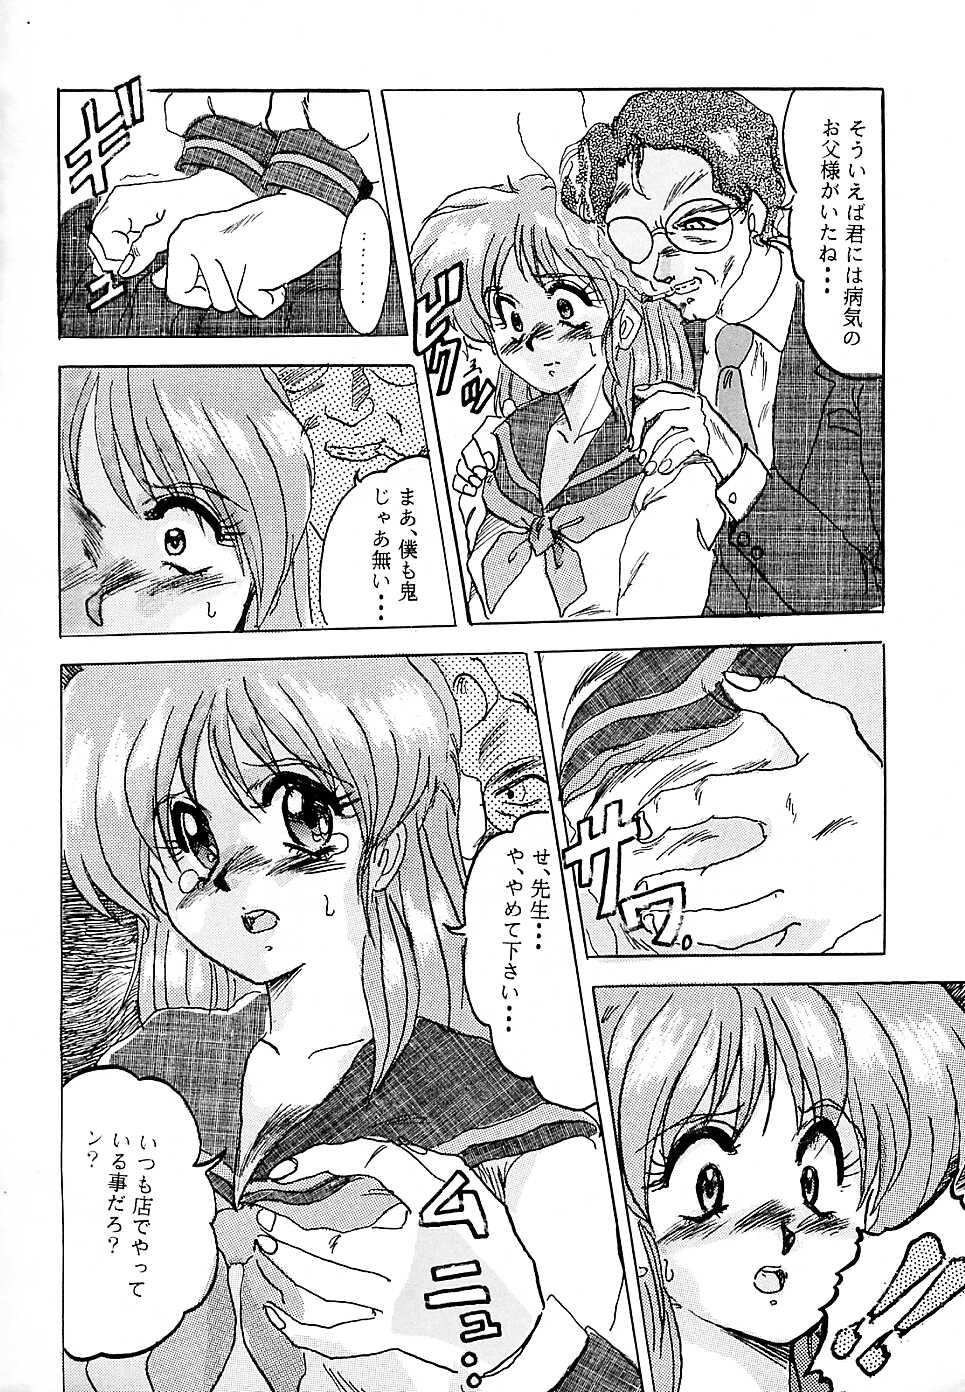 Butt Plug F 93C - Brave express might gaine This - Page 5